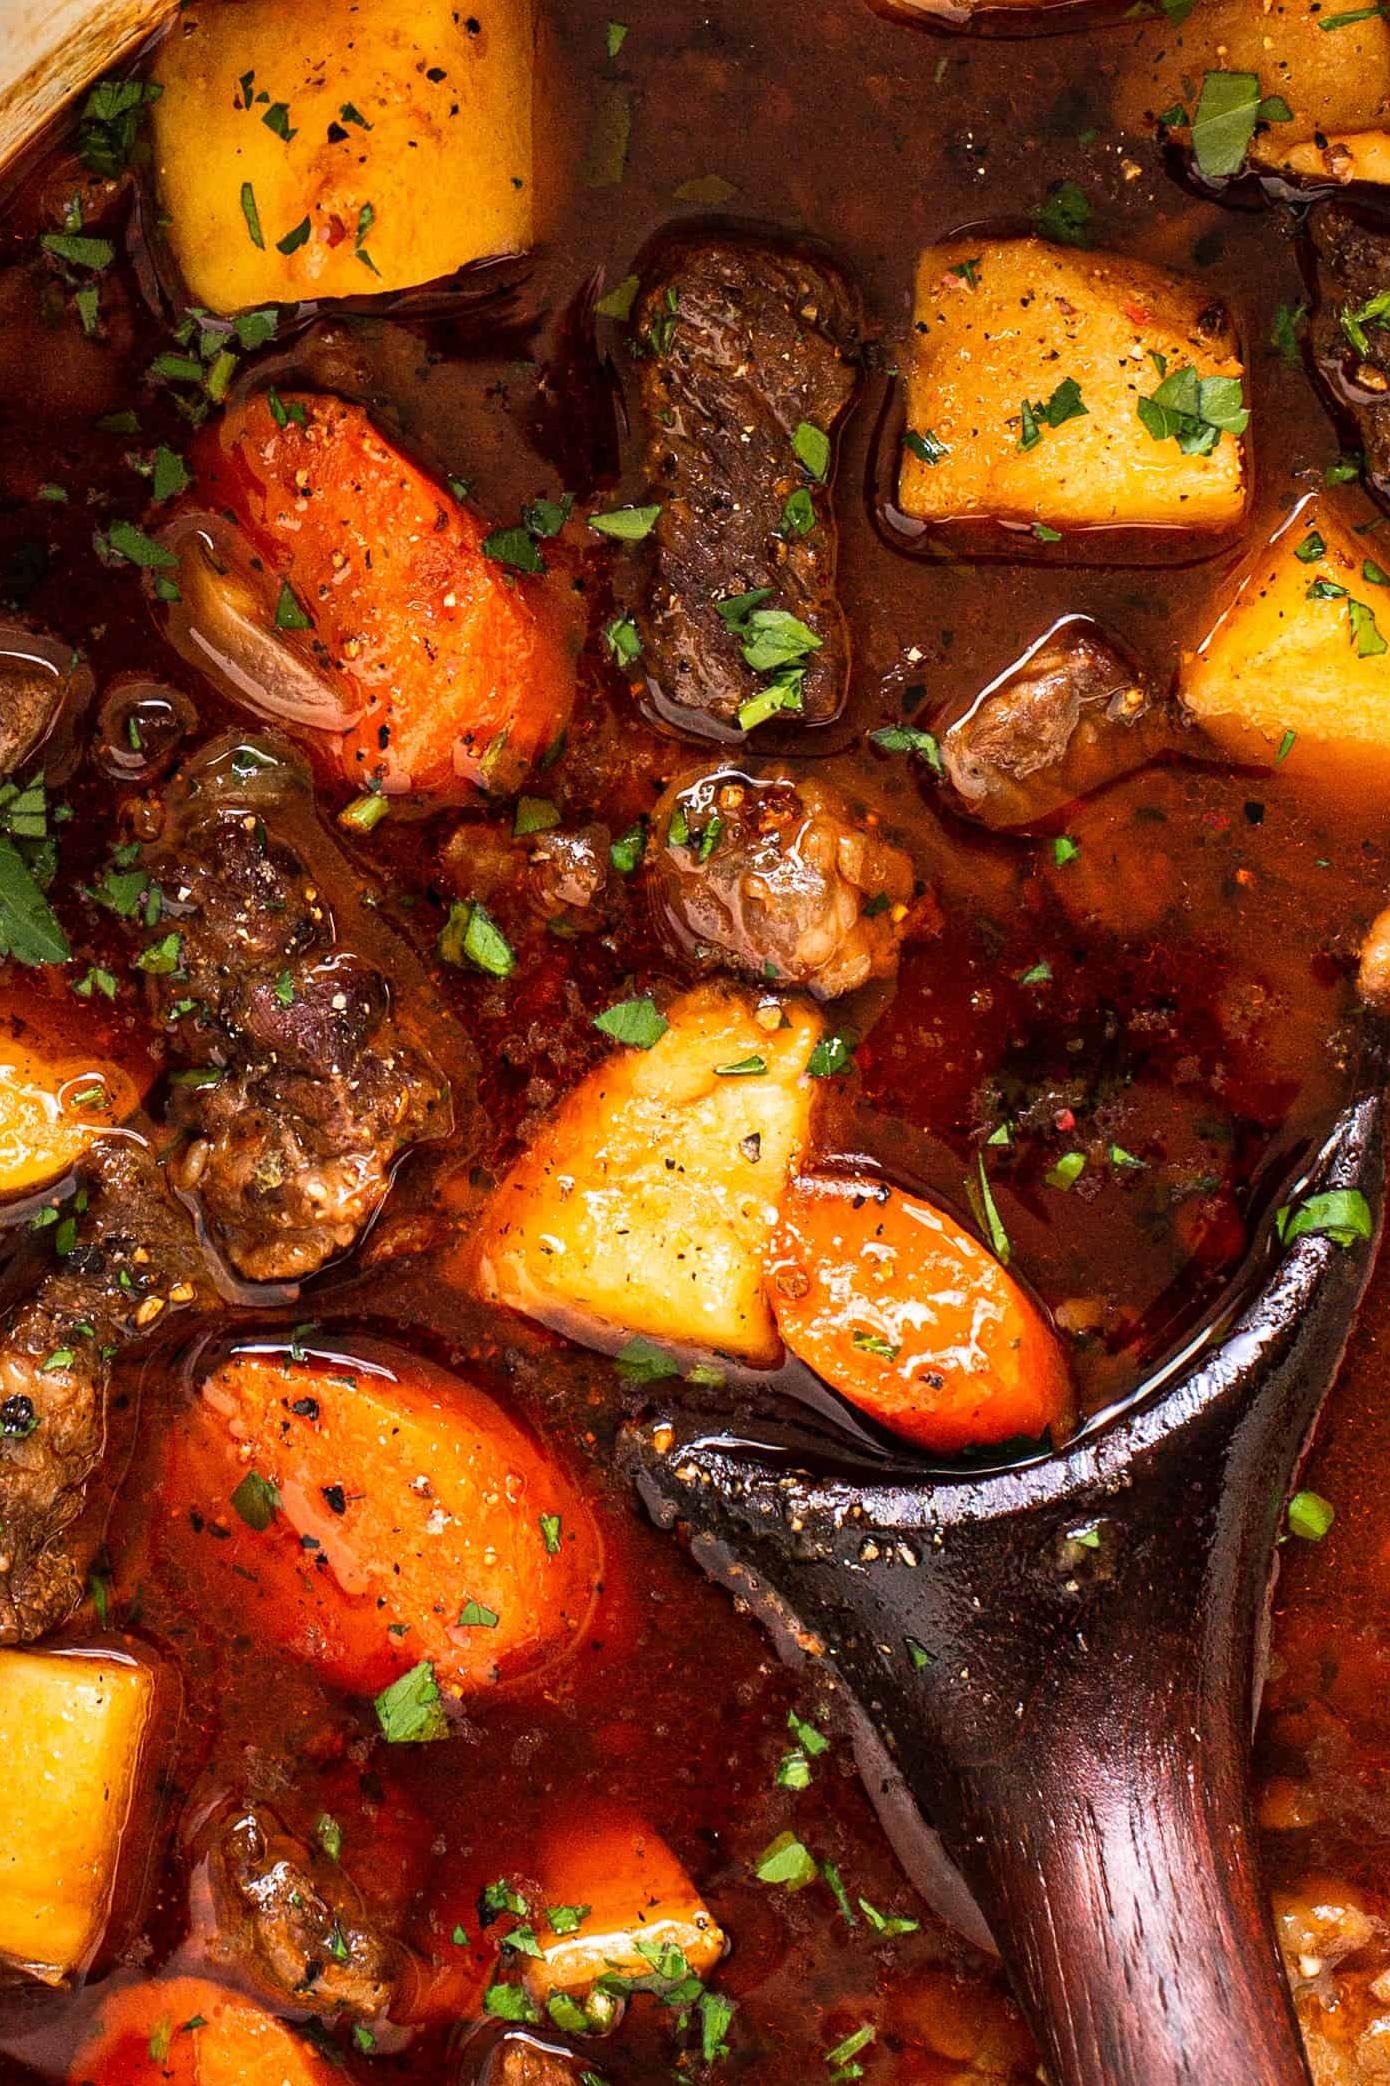  Raise a glass of red wine to enhance the flavors of this dish.